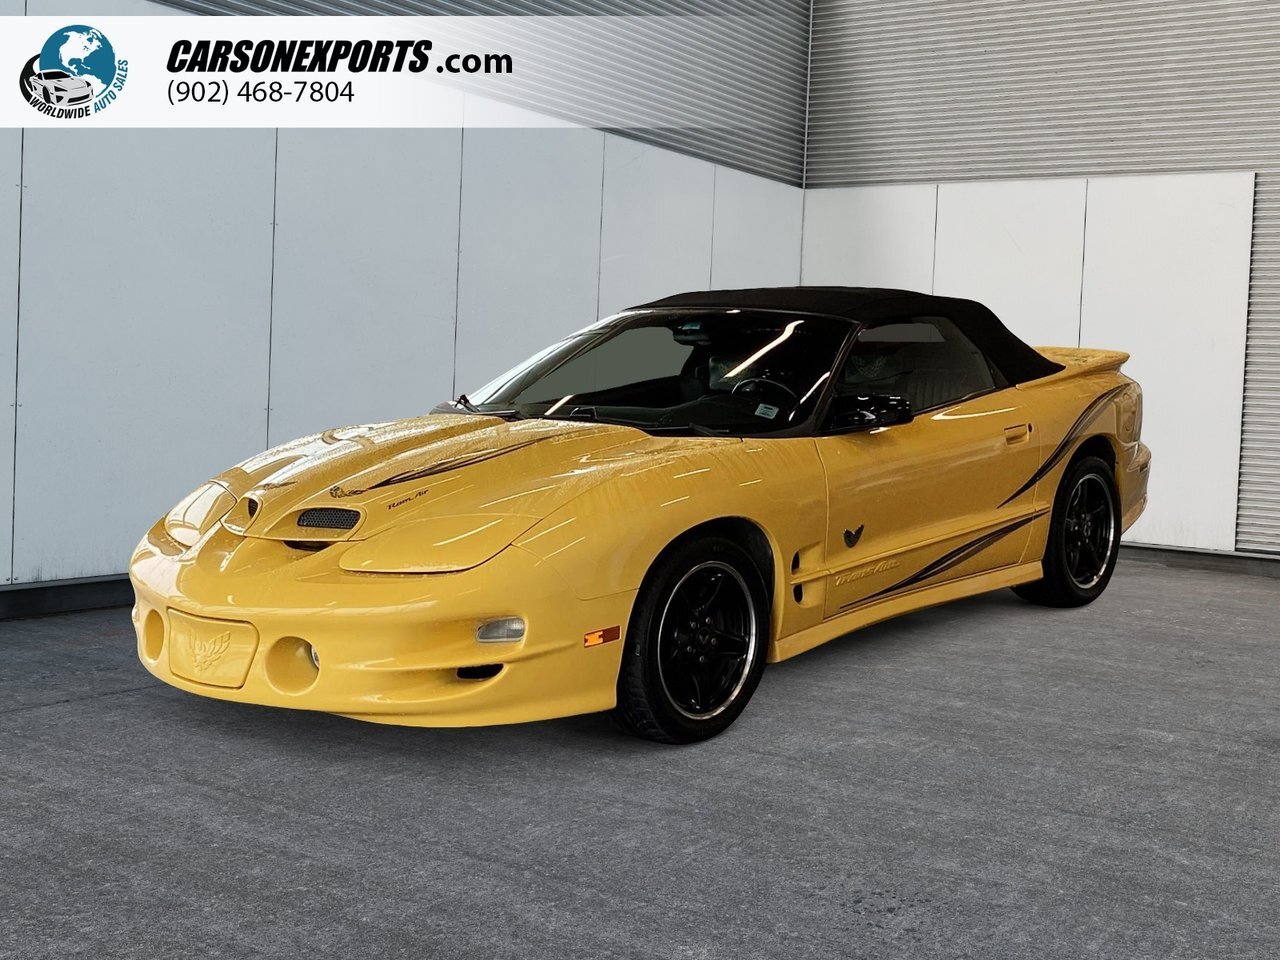 2002 Pontiac Firebird Trans Am The best place to buy a used car. Period.